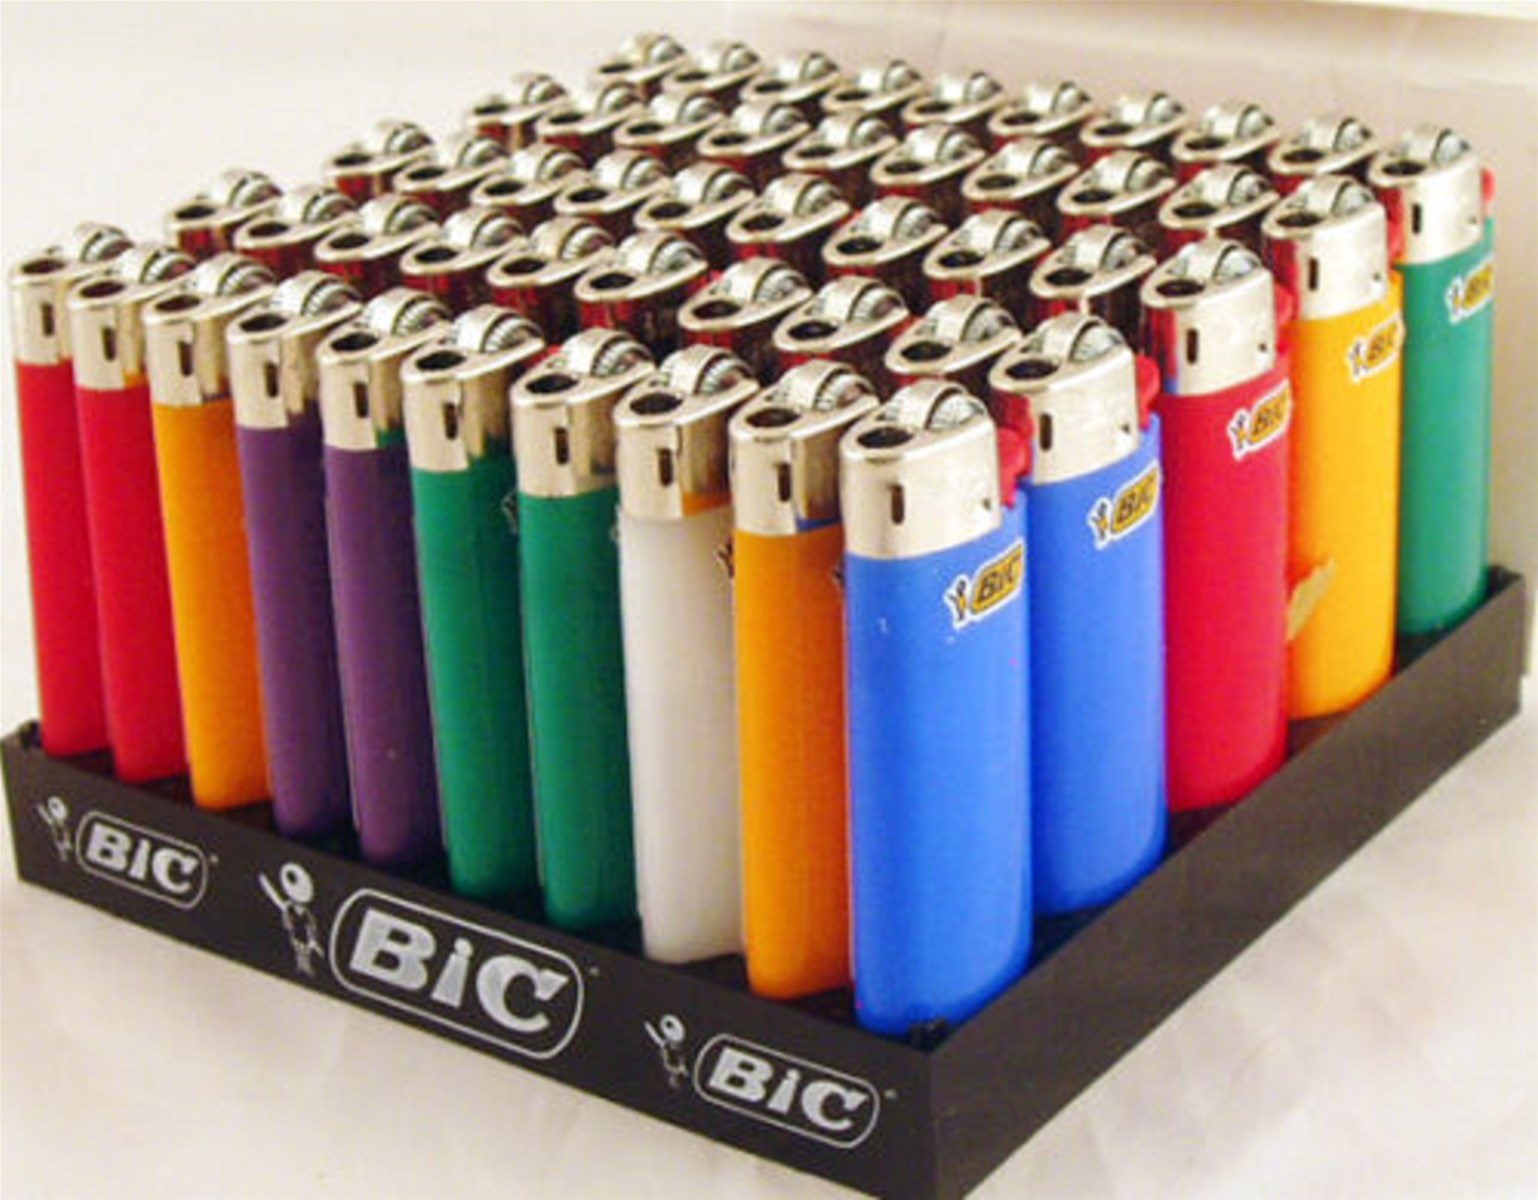 Bic Classic Full size disposable cigarette lighters Assorted Colors 50 pack